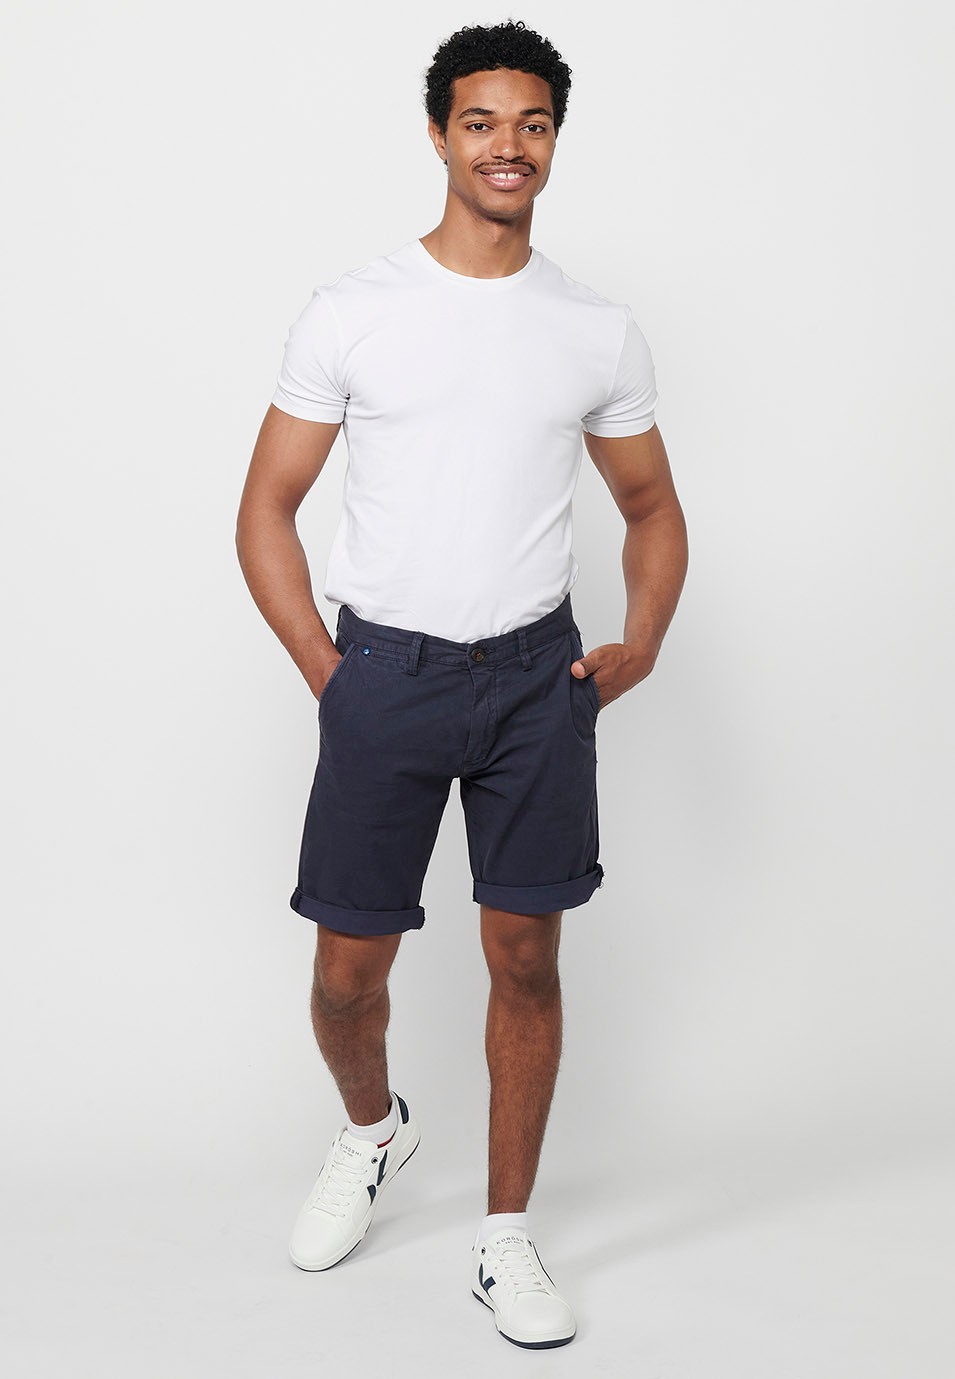 Bermuda Chino shorts with turn-up finish with front zipper and button closure with four pockets in Navy Color for Men